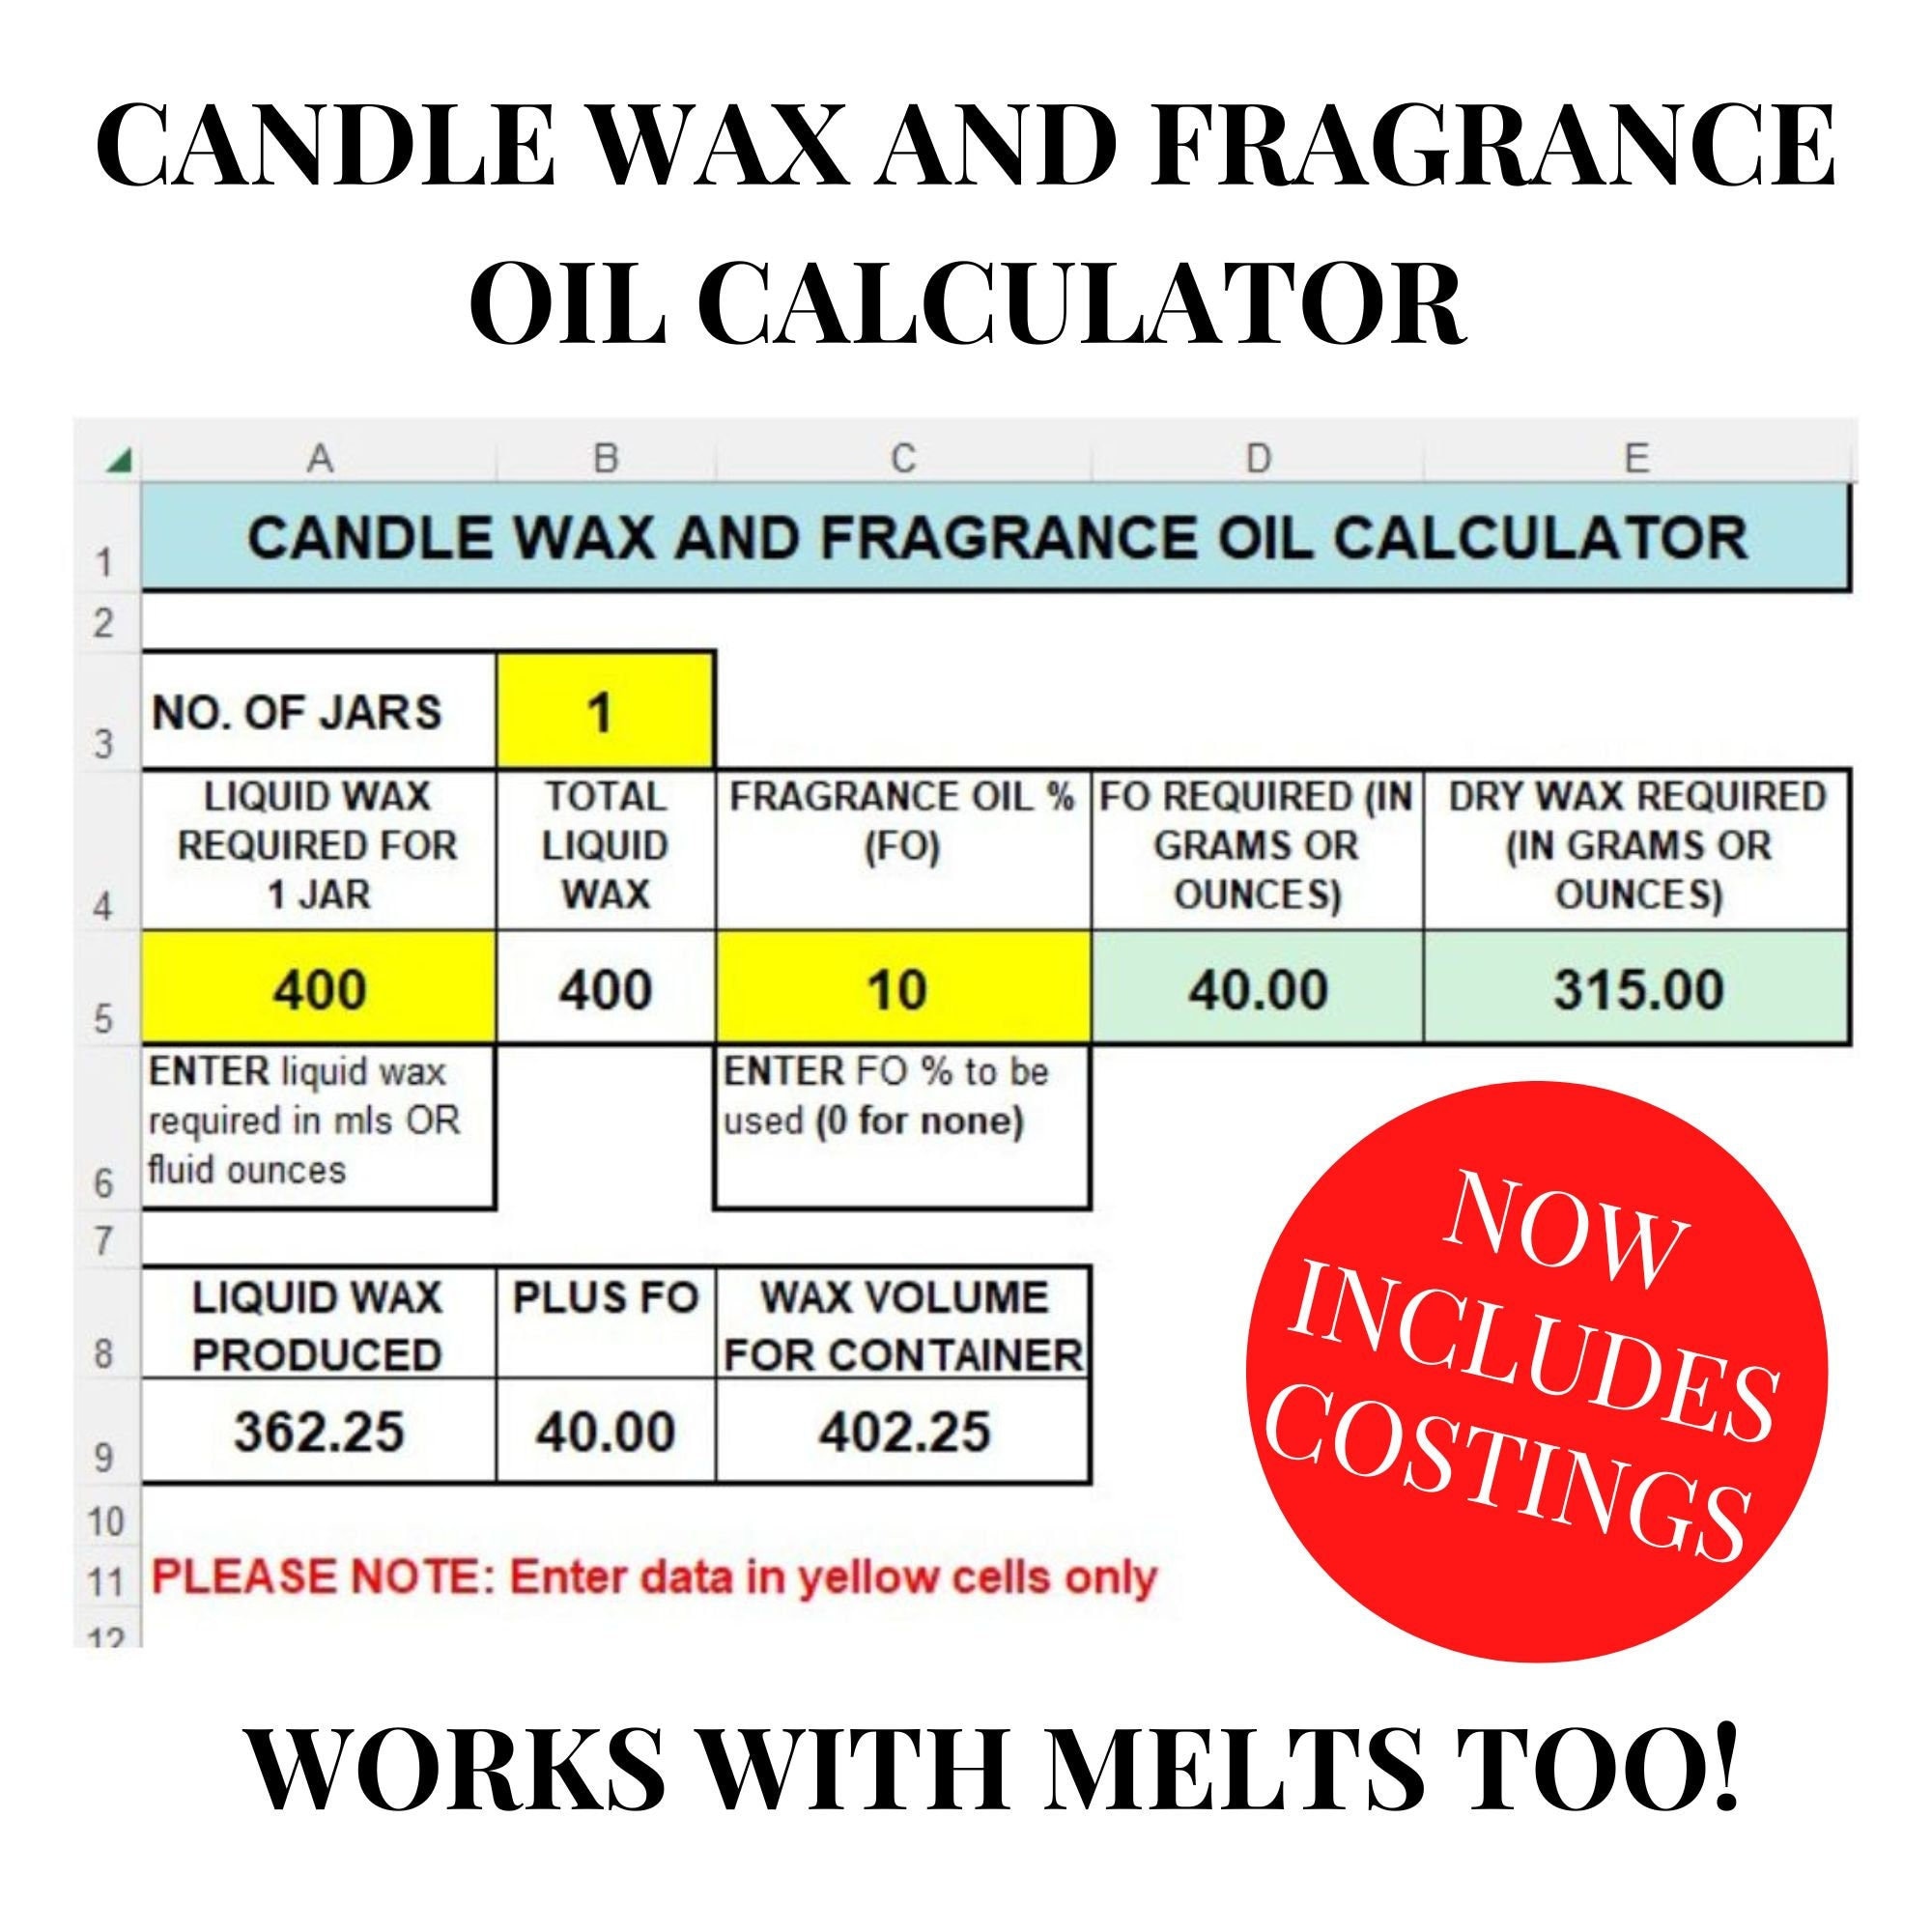 How Much Fragrance Oil Should Be Added to Wax?